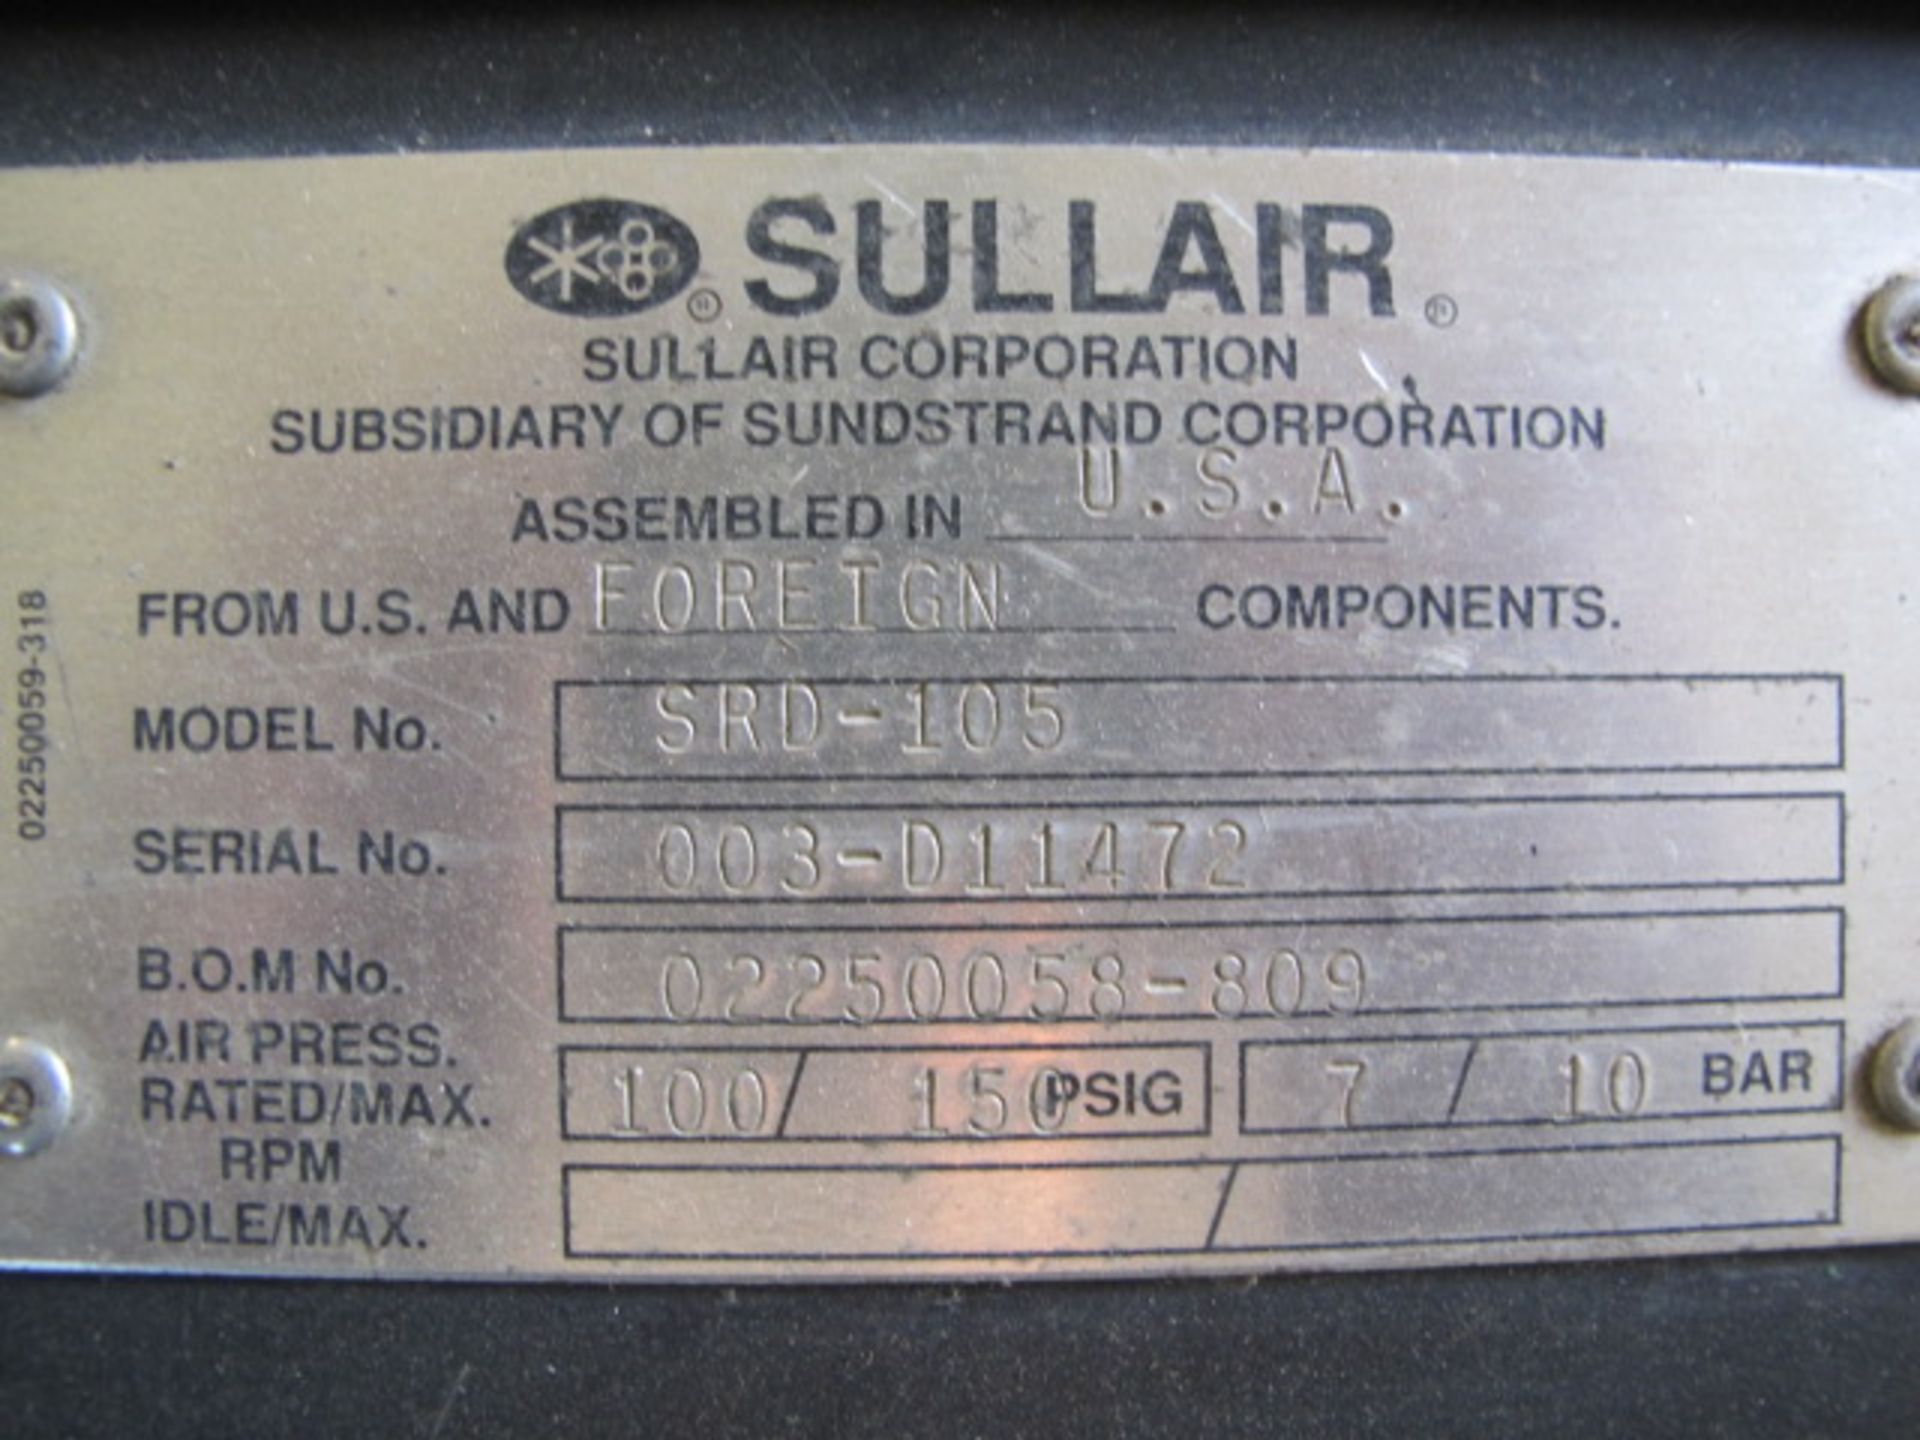 Sullair SRD-105 Refrigerated Air Dryer s/n 003-D11472 - Image 3 of 3